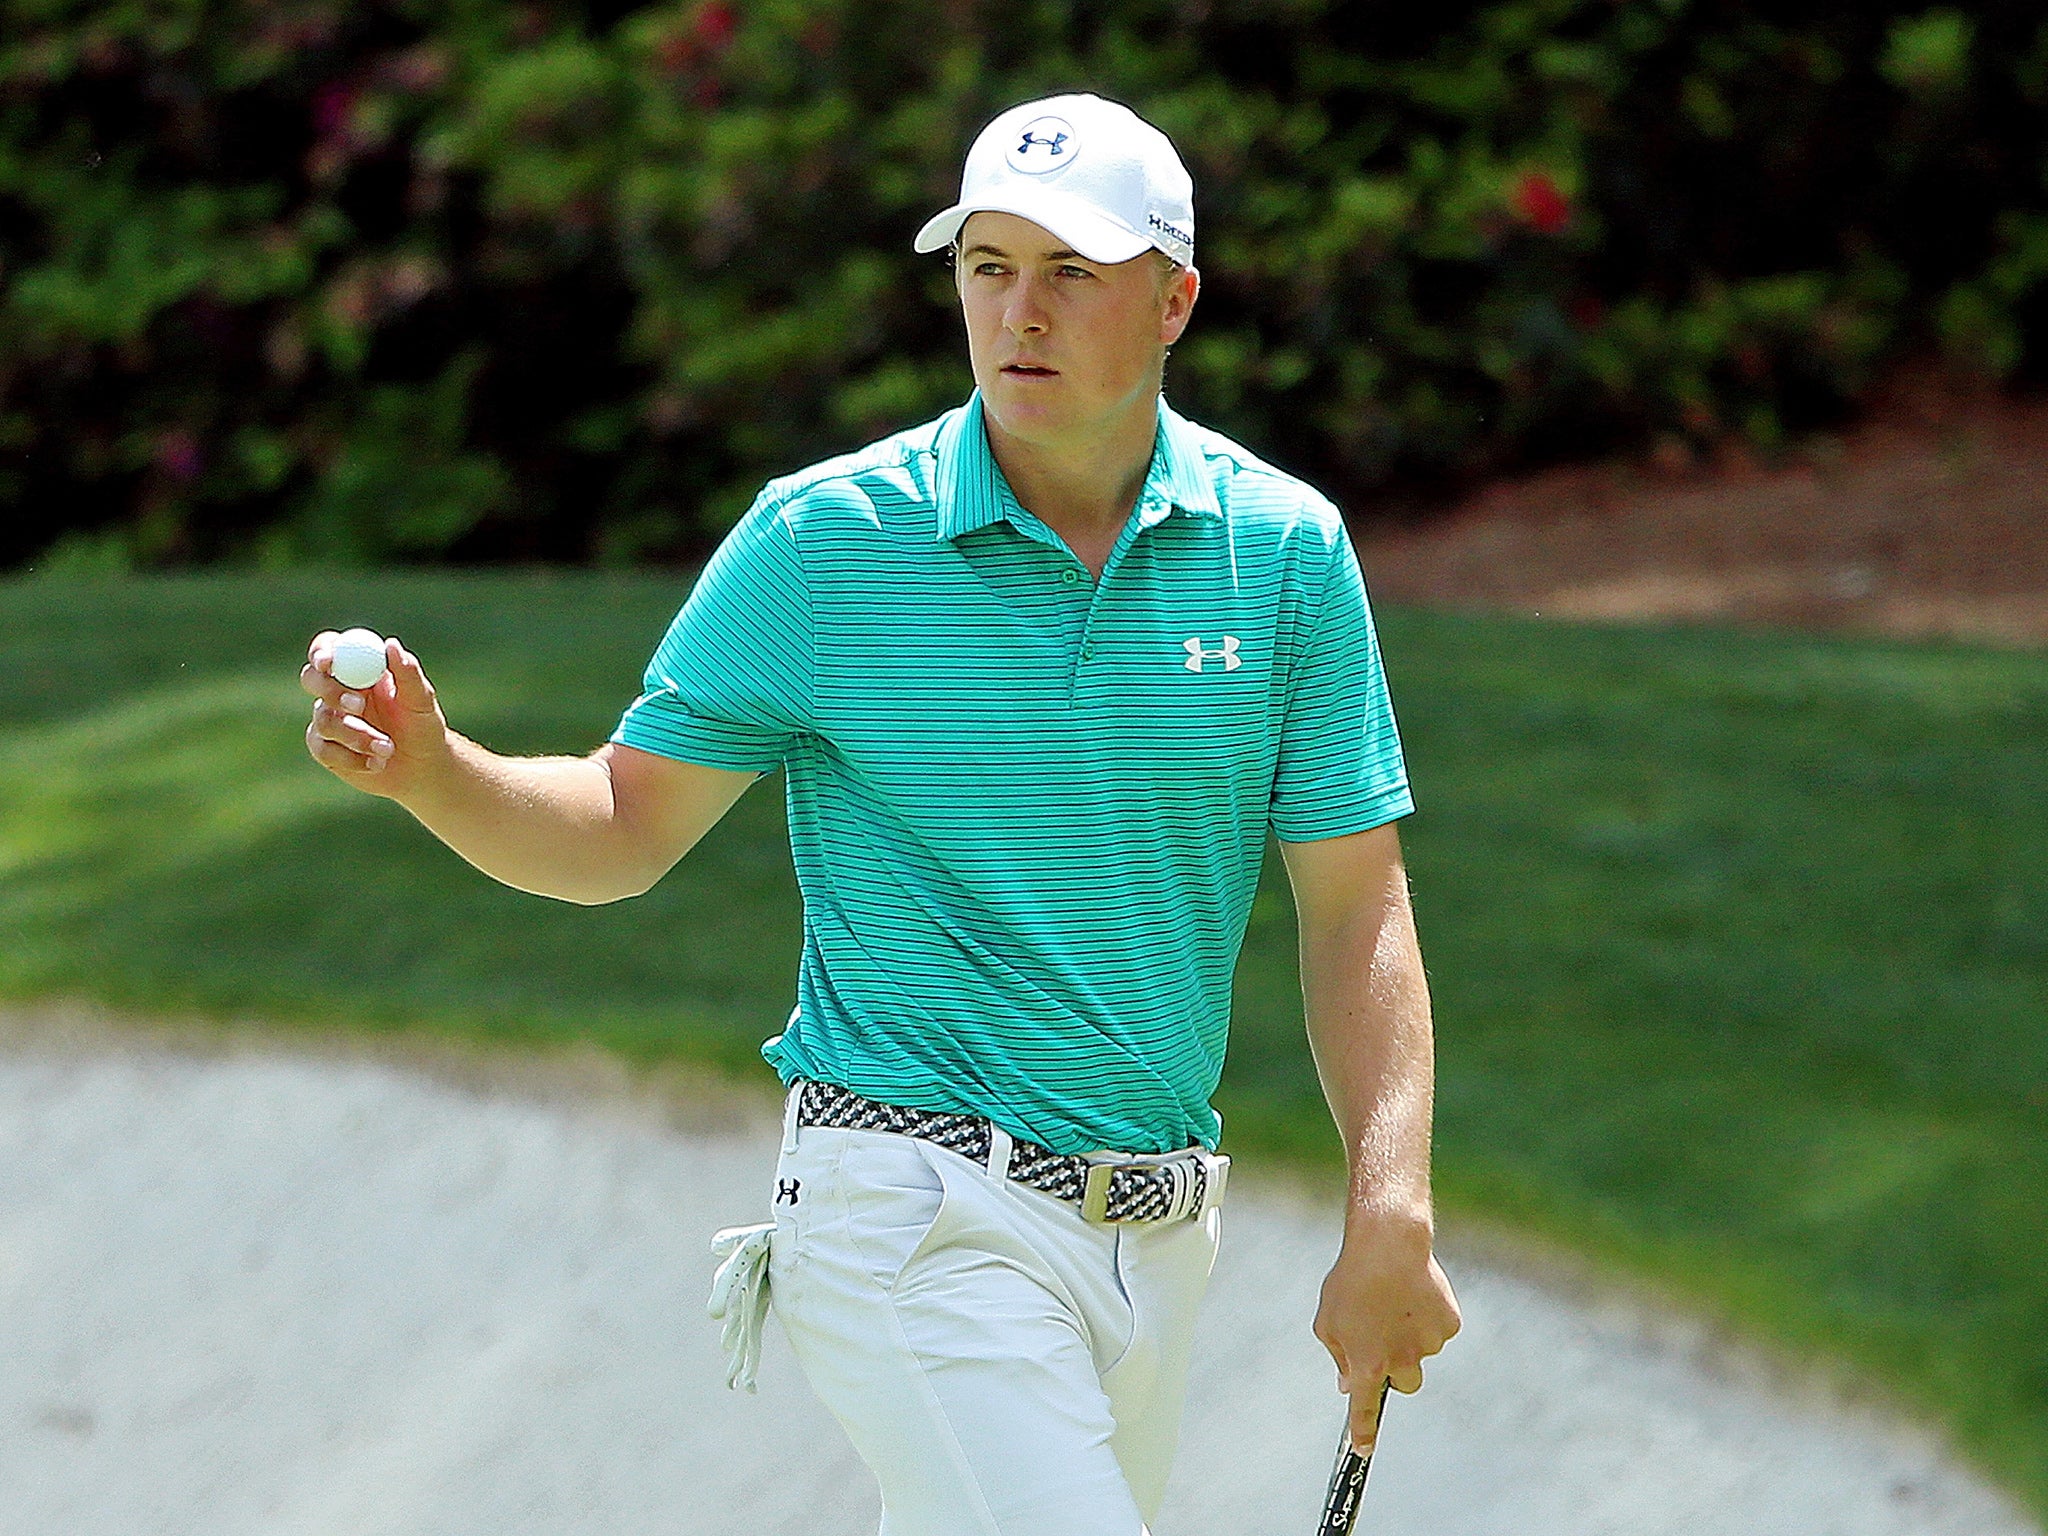 Spieth holds up his ball after putting for birdie on the 13th green